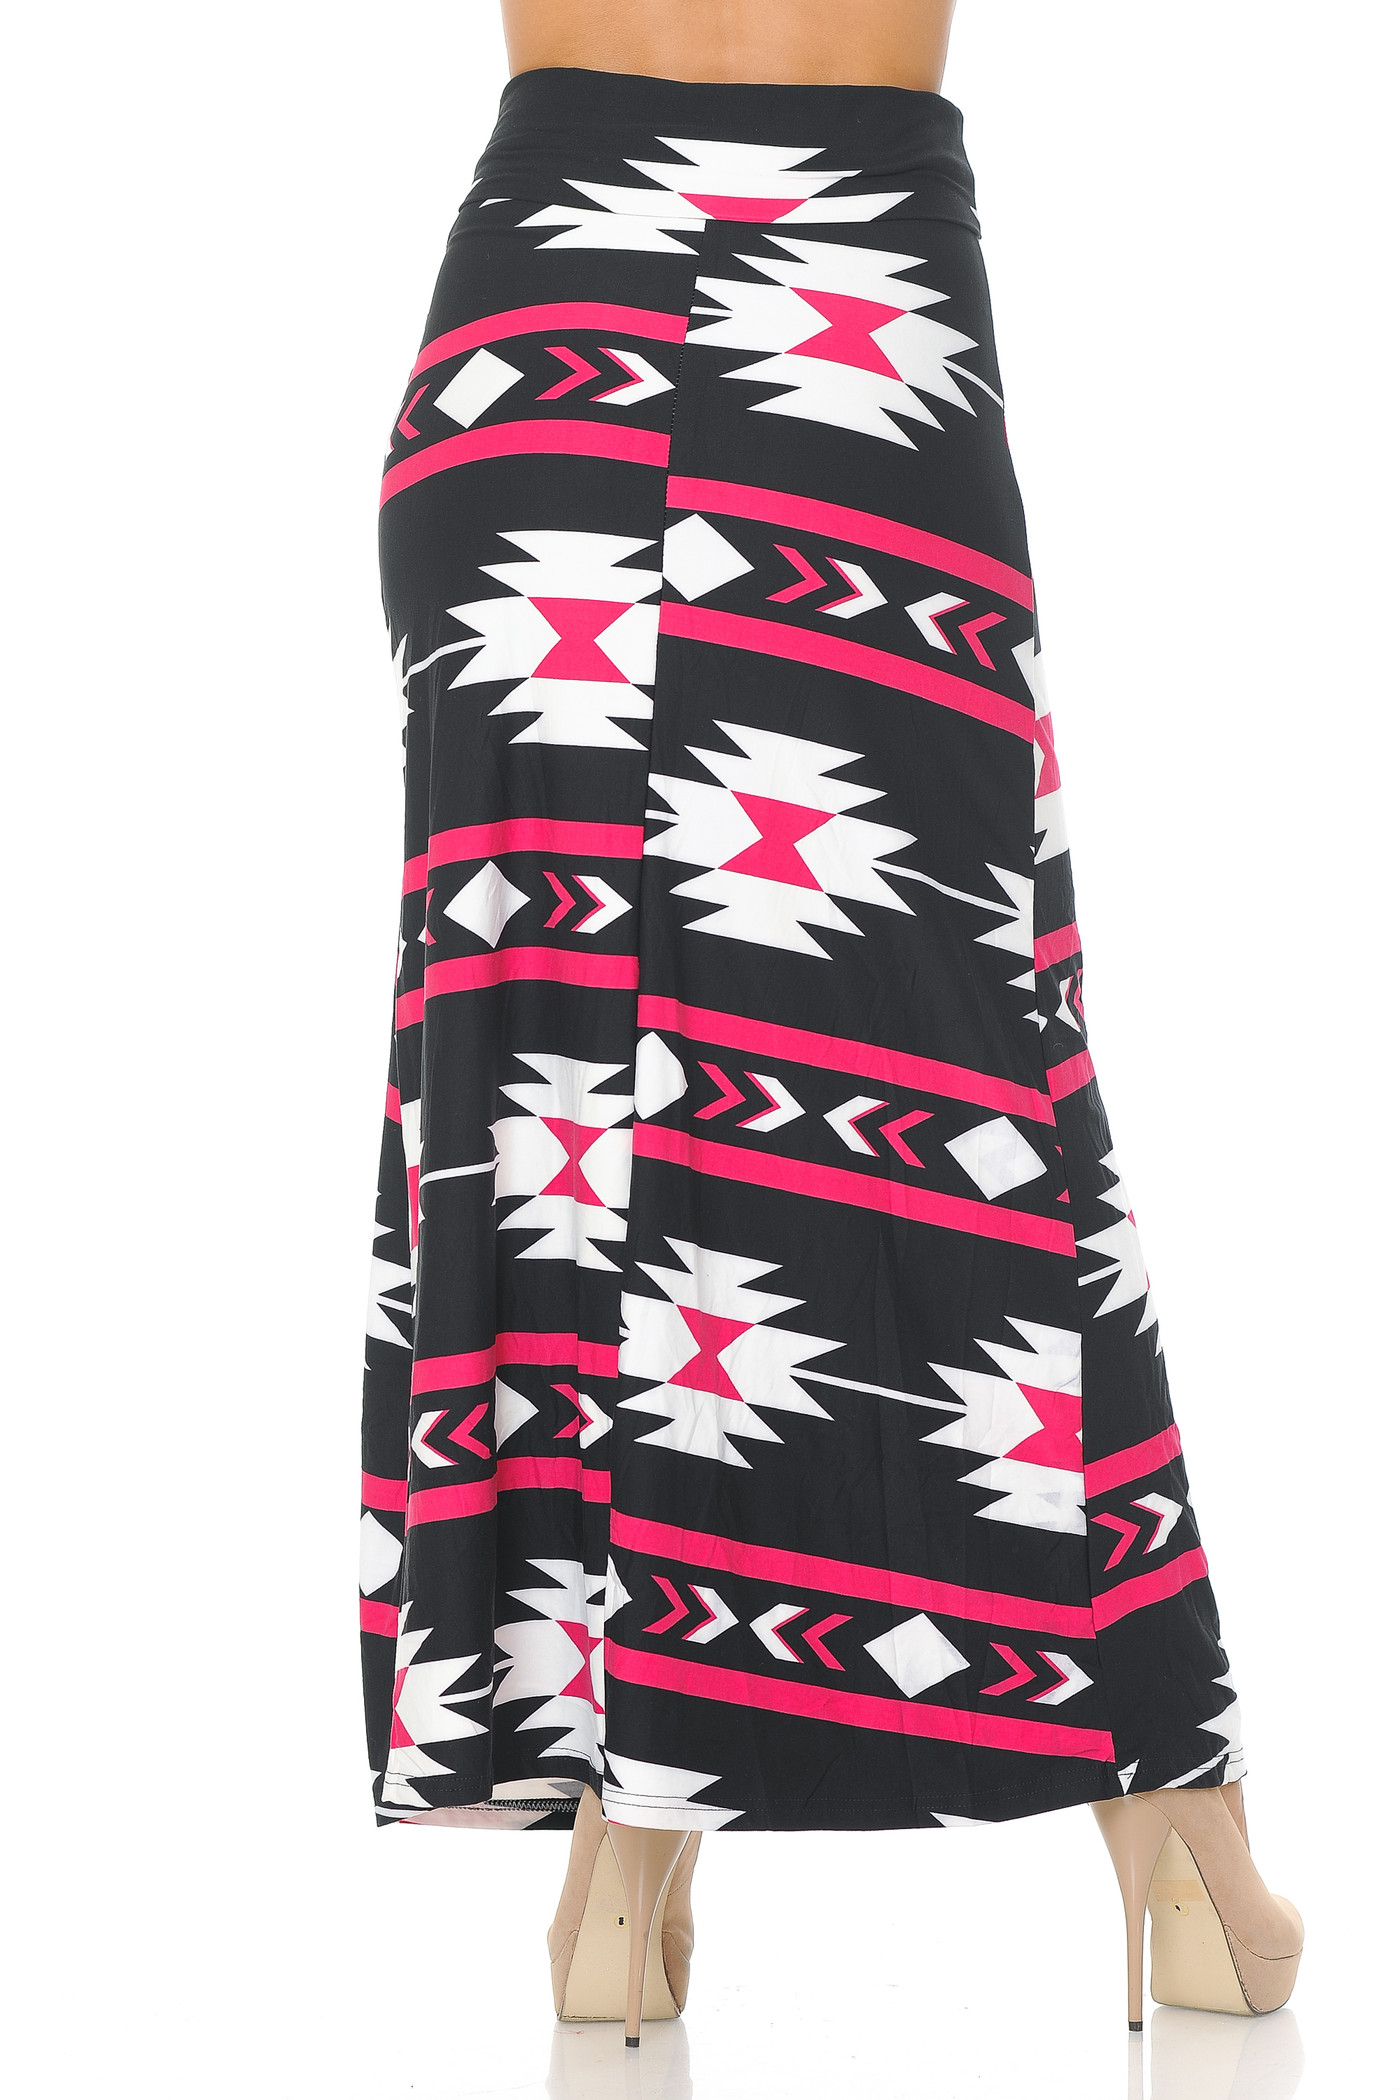 Mint on Black Aztec Tribal Buttery Smooth Maxi Skirt